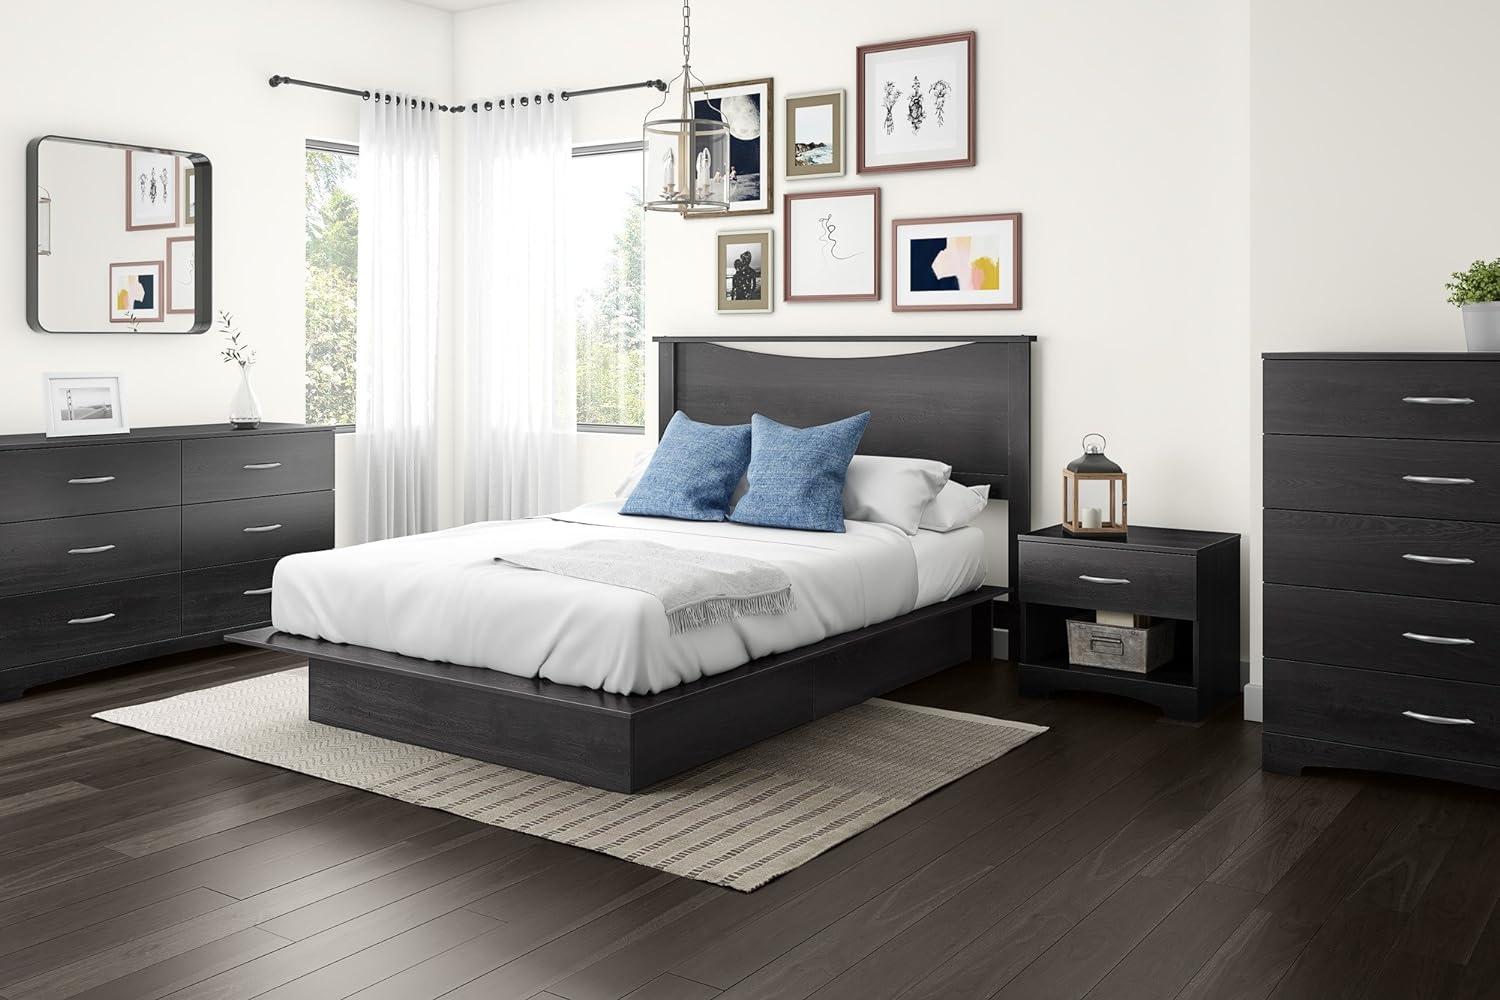 Queen-Sized Oak Wood Frame Platform Bed with Upholstered Storage Drawers